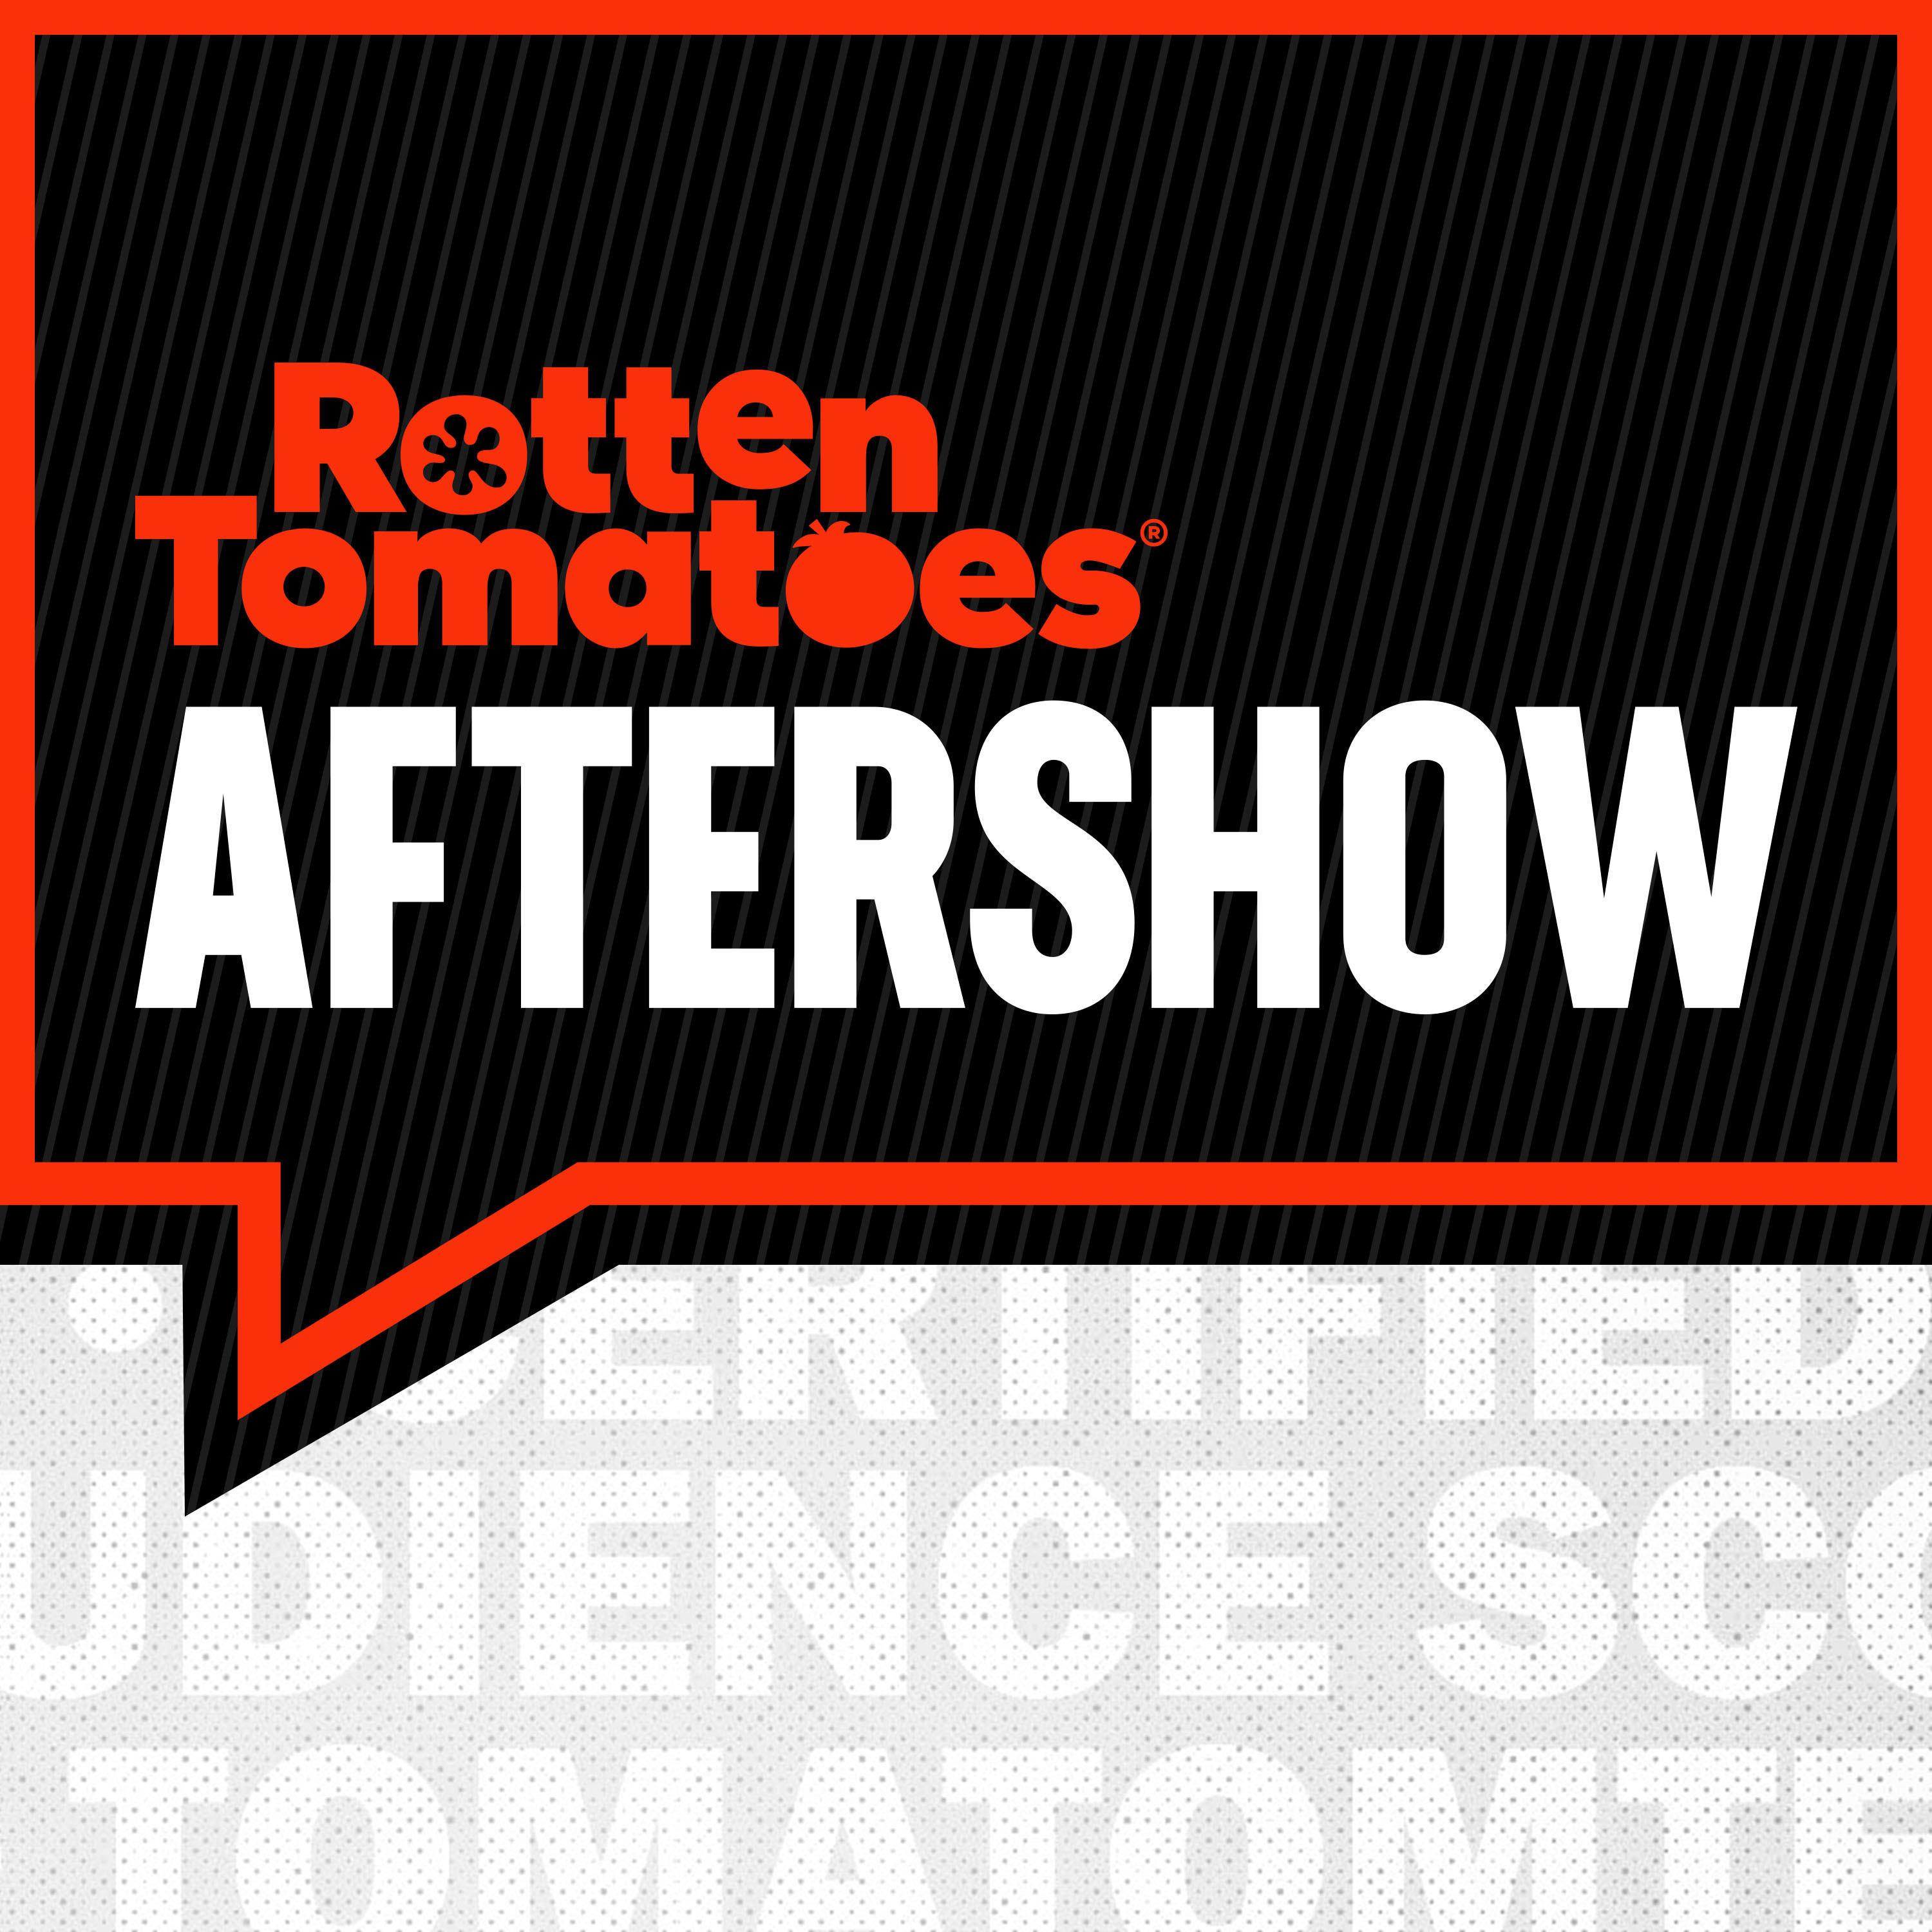 rotten tomatoes logo png